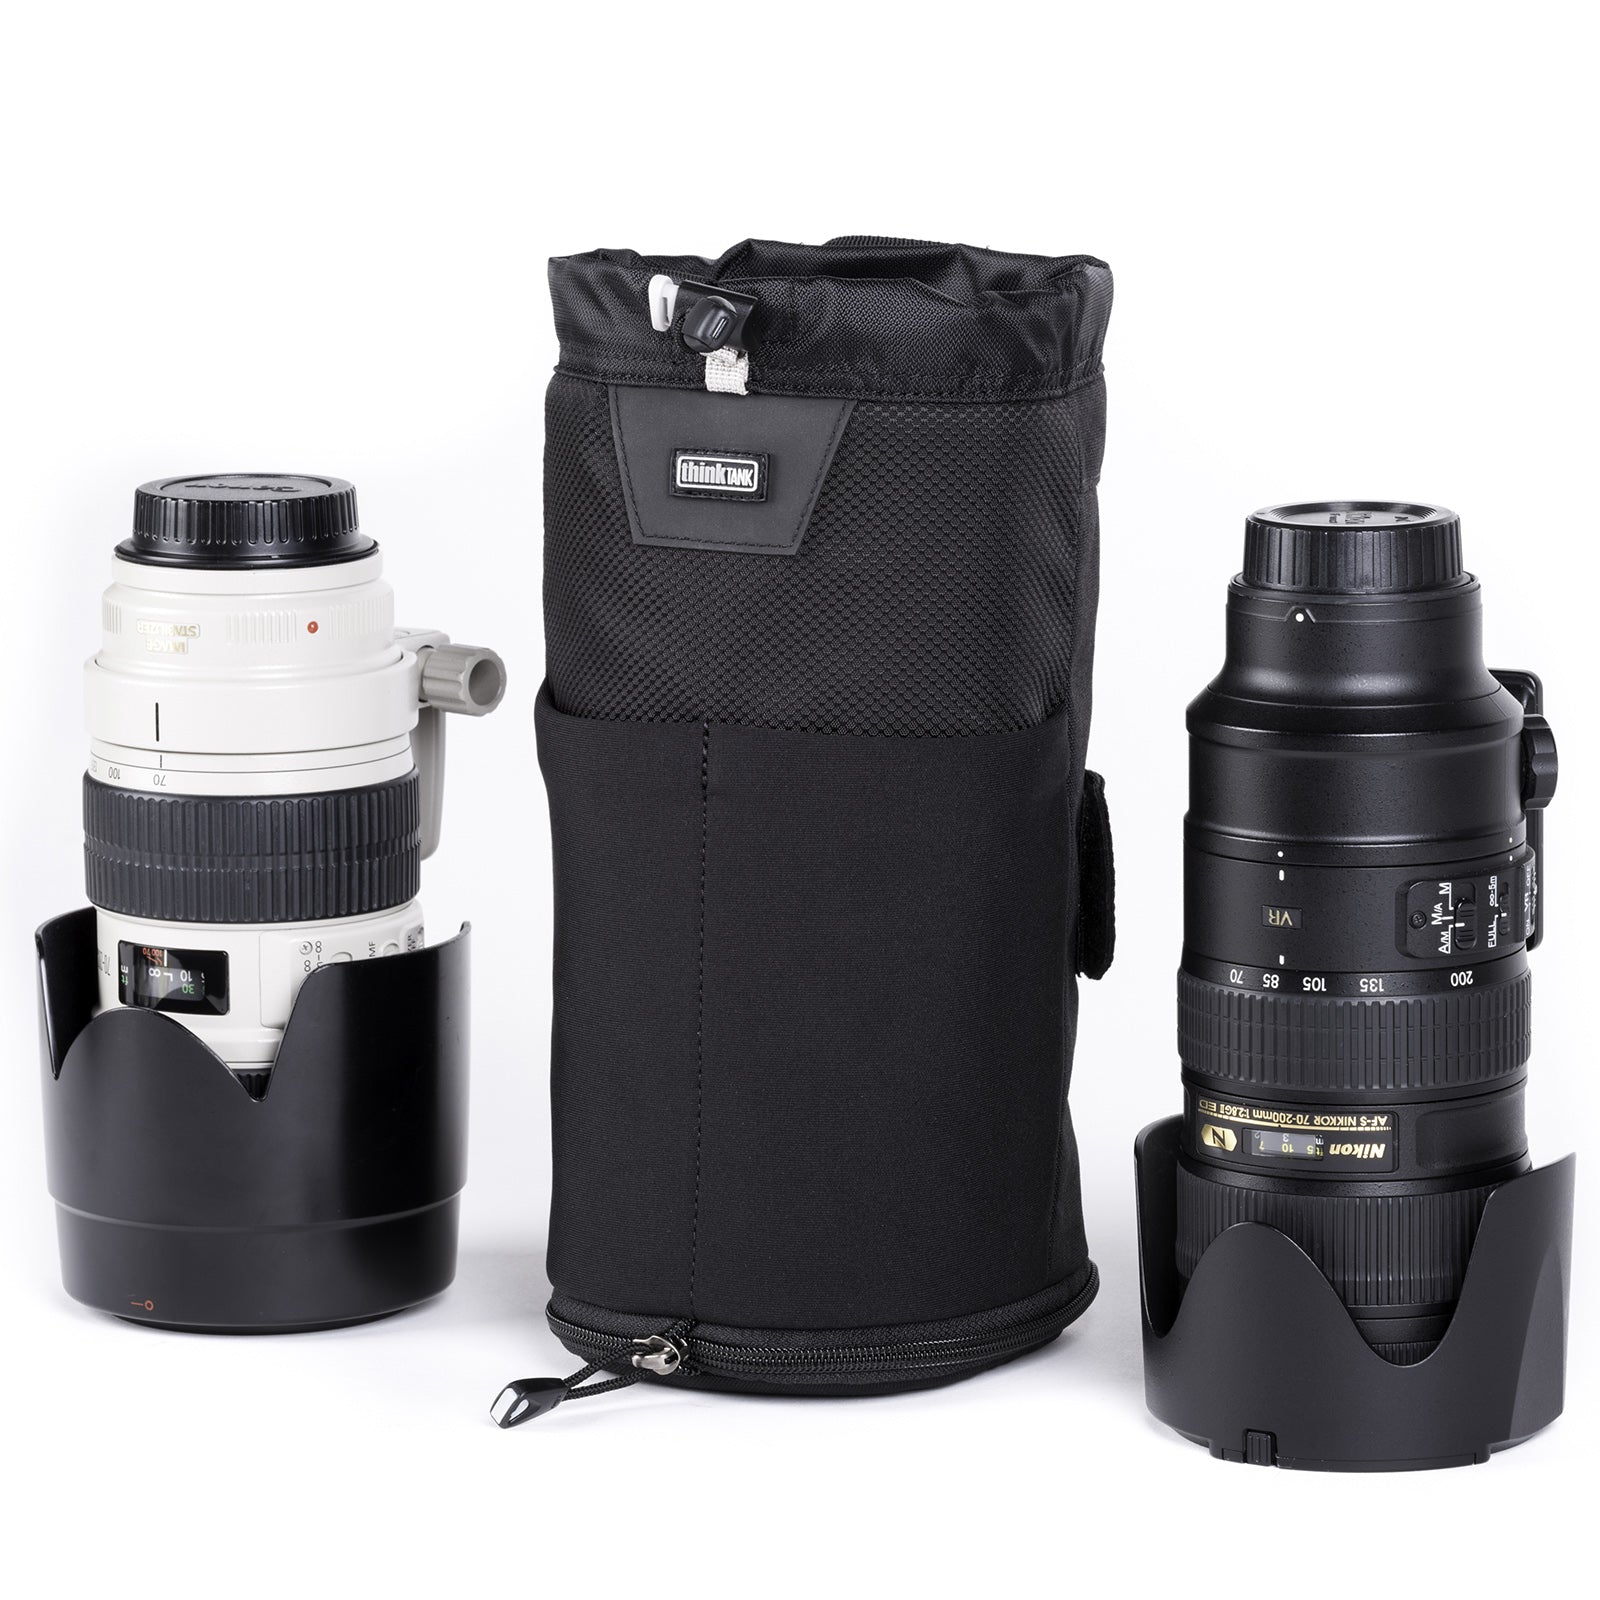 Modular pouch accommodates a 70–200mm f/2.8 lens with hood reversed or in shooting position when popped down